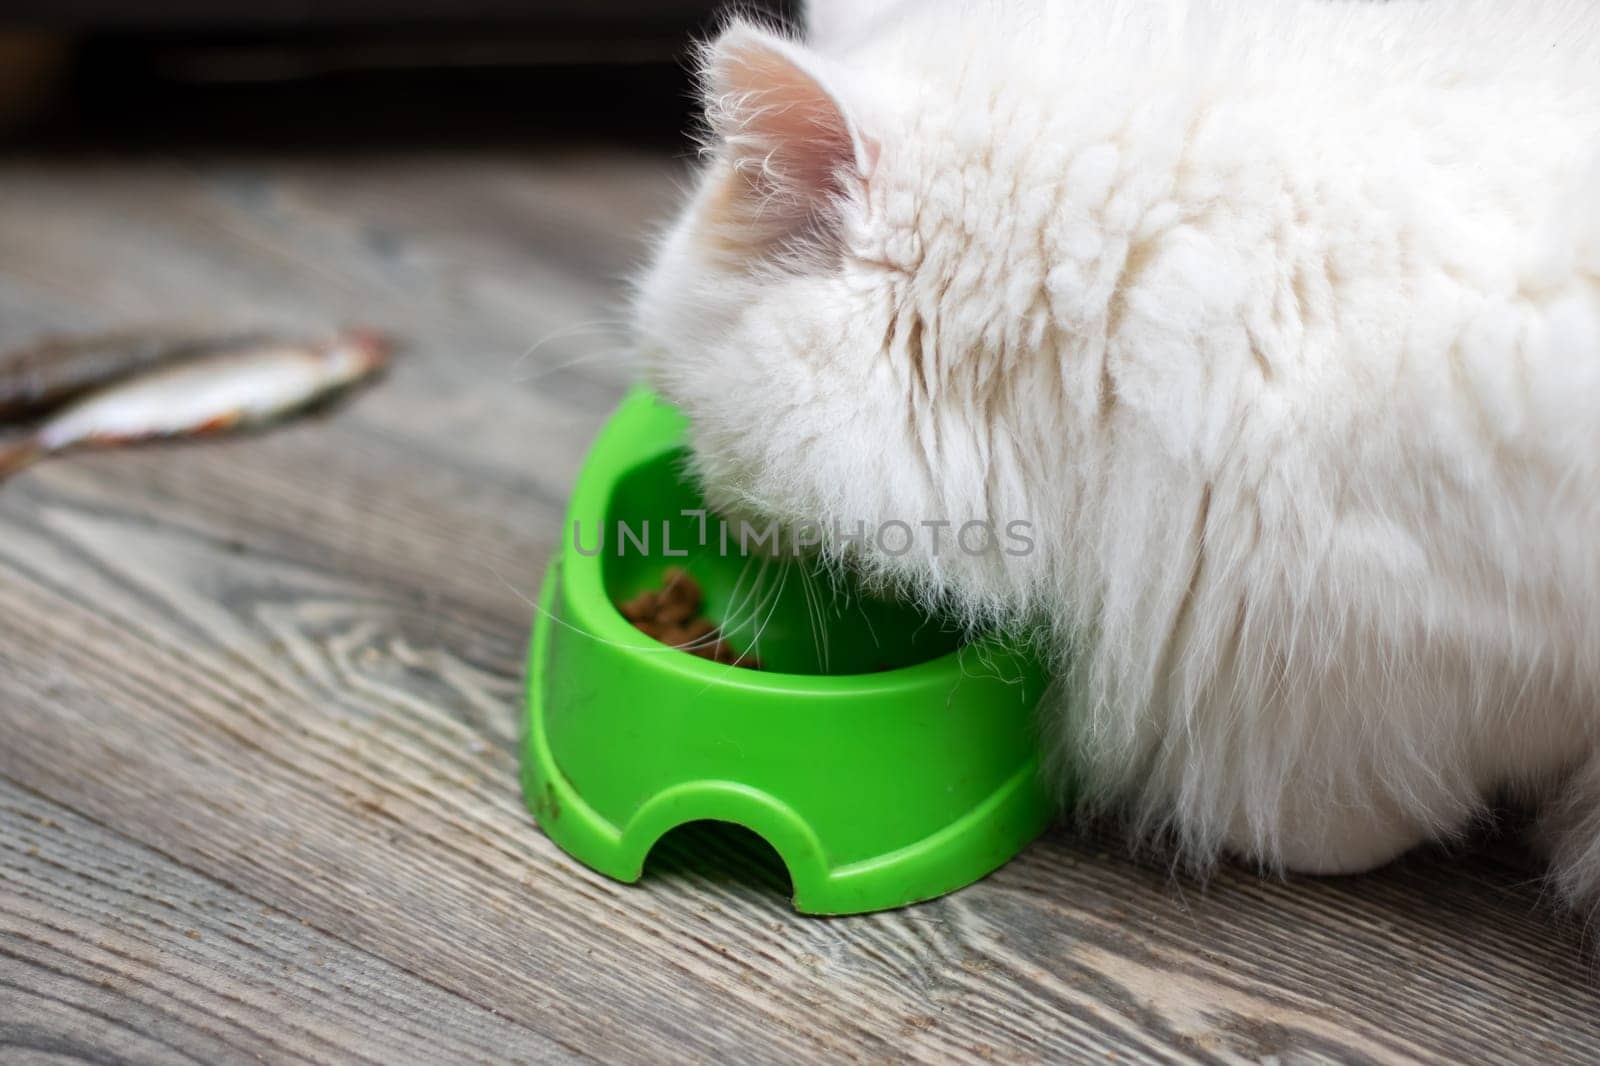 A Felidae carnivore, the white cat with whiskers is eating food from a green bowl. This small to mediumsized mammal is a popular pet supply, known for its keen vision care